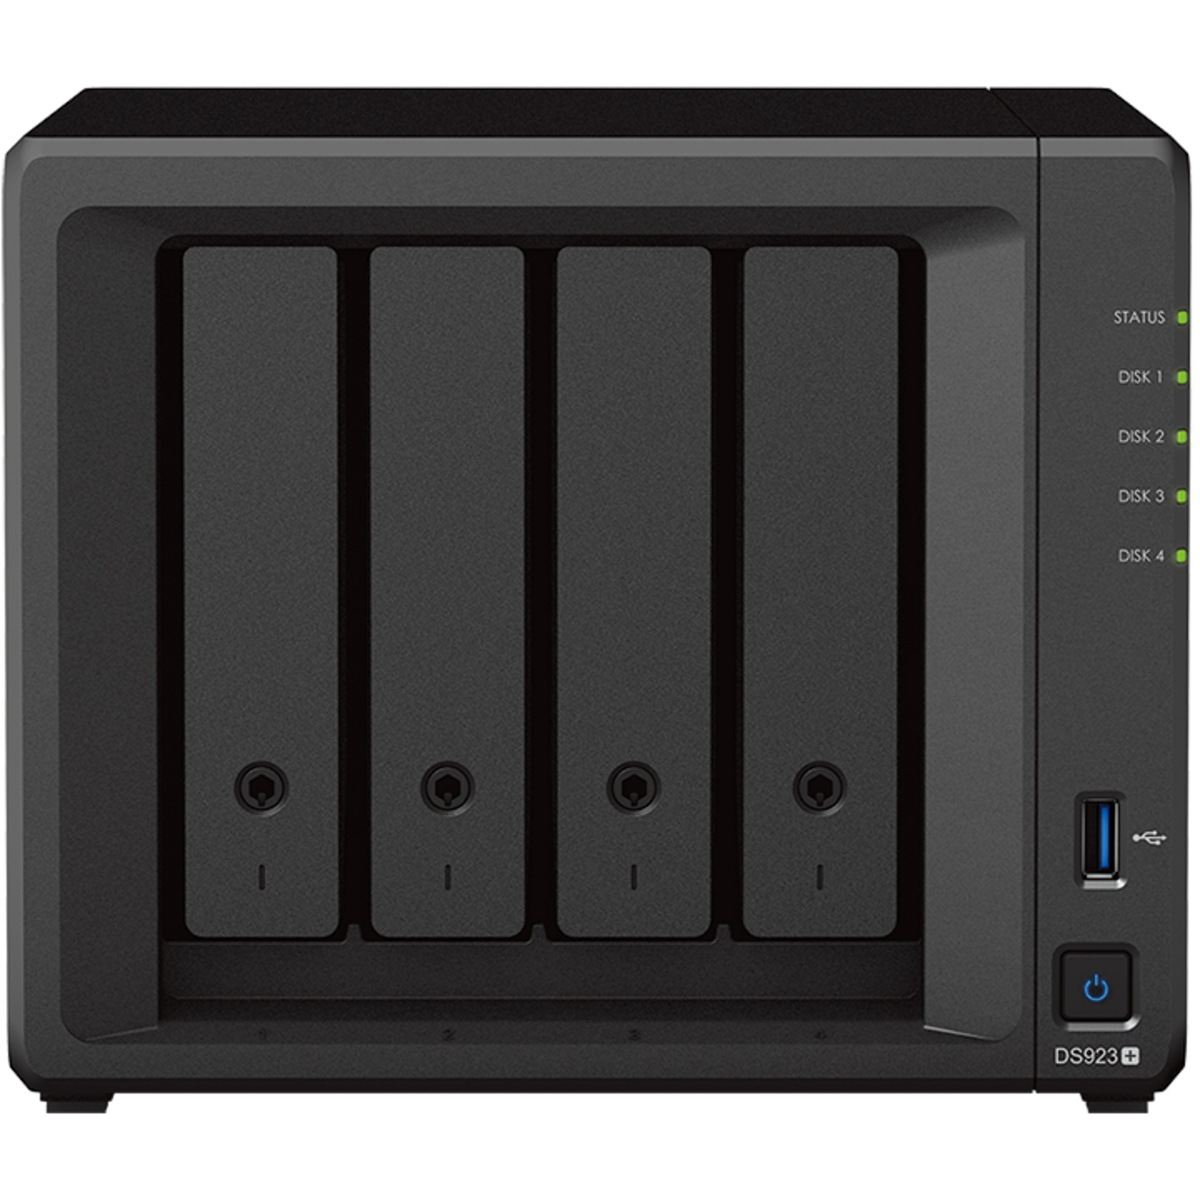 Synology DiskStation DS923+ 24tb 4-Bay Desktop Multimedia / Power User / Business NAS - Network Attached Storage Device 2x12tb Seagate EXOS X18 ST12000NM000J 3.5 7200rpm SATA 6Gb/s HDD ENTERPRISE Class Drives Installed - Burn-In Tested - ON SALE - FREE RAM UPGRADE DiskStation DS923+